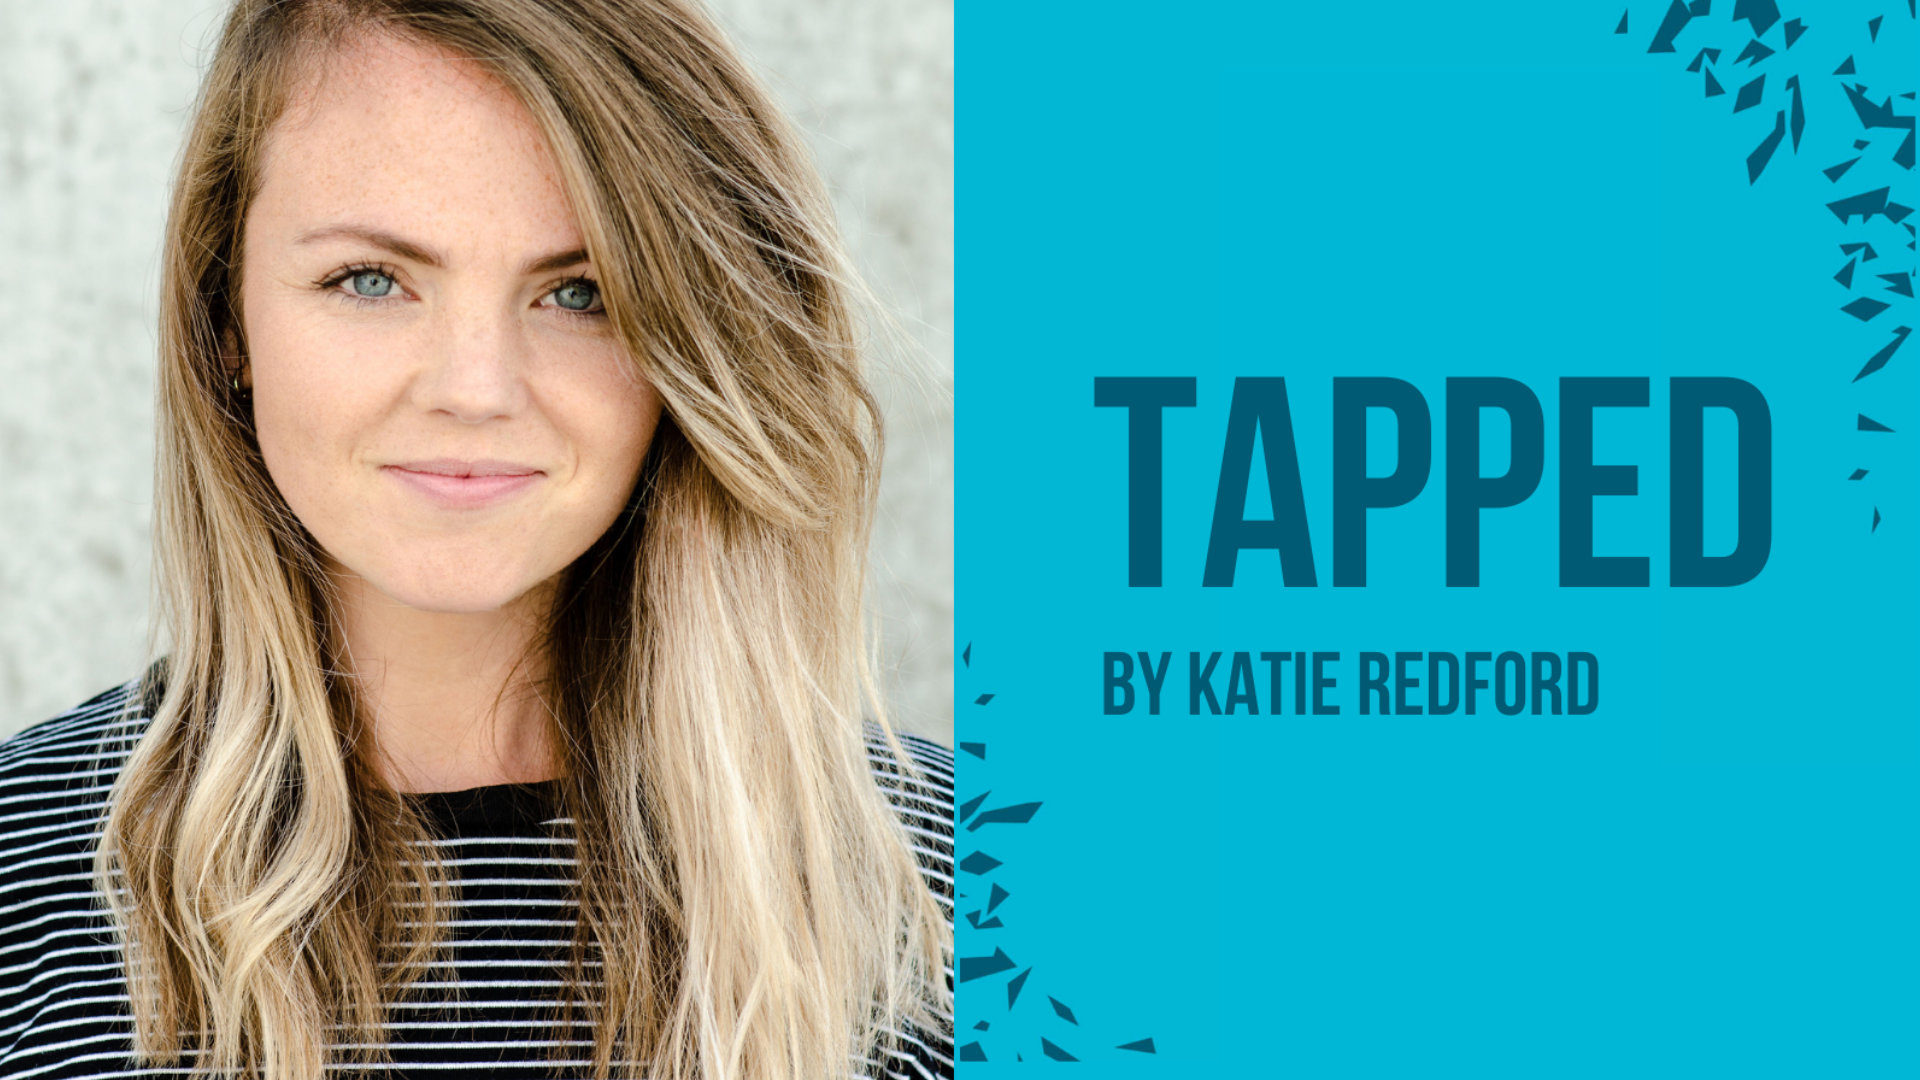 Katie Redford's debut play Tapped to have world premiere at Theatre503 ...